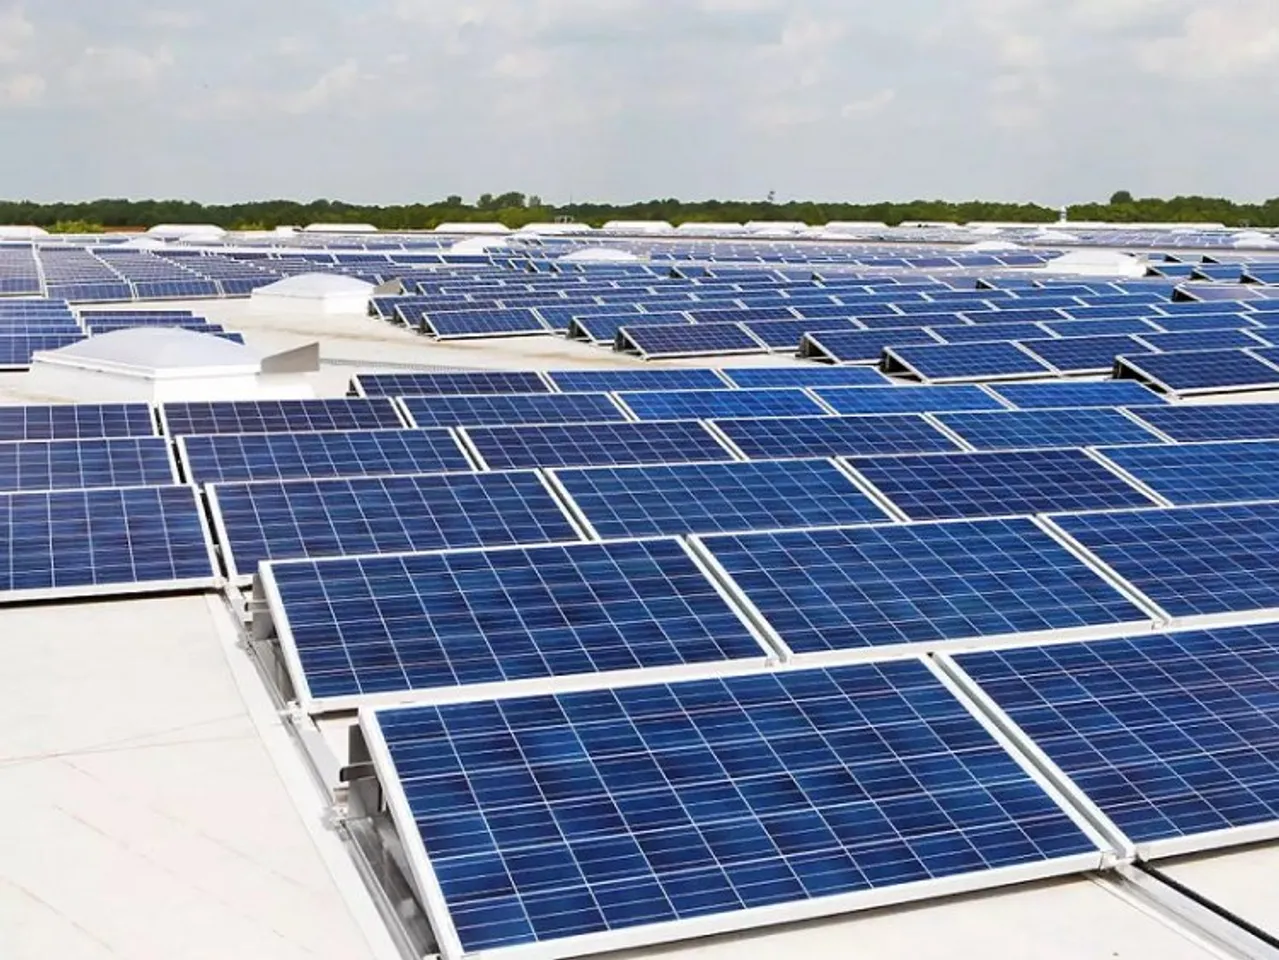 Tata Power Solar Systems commissions 100 solar project with 120 MWh battery storage